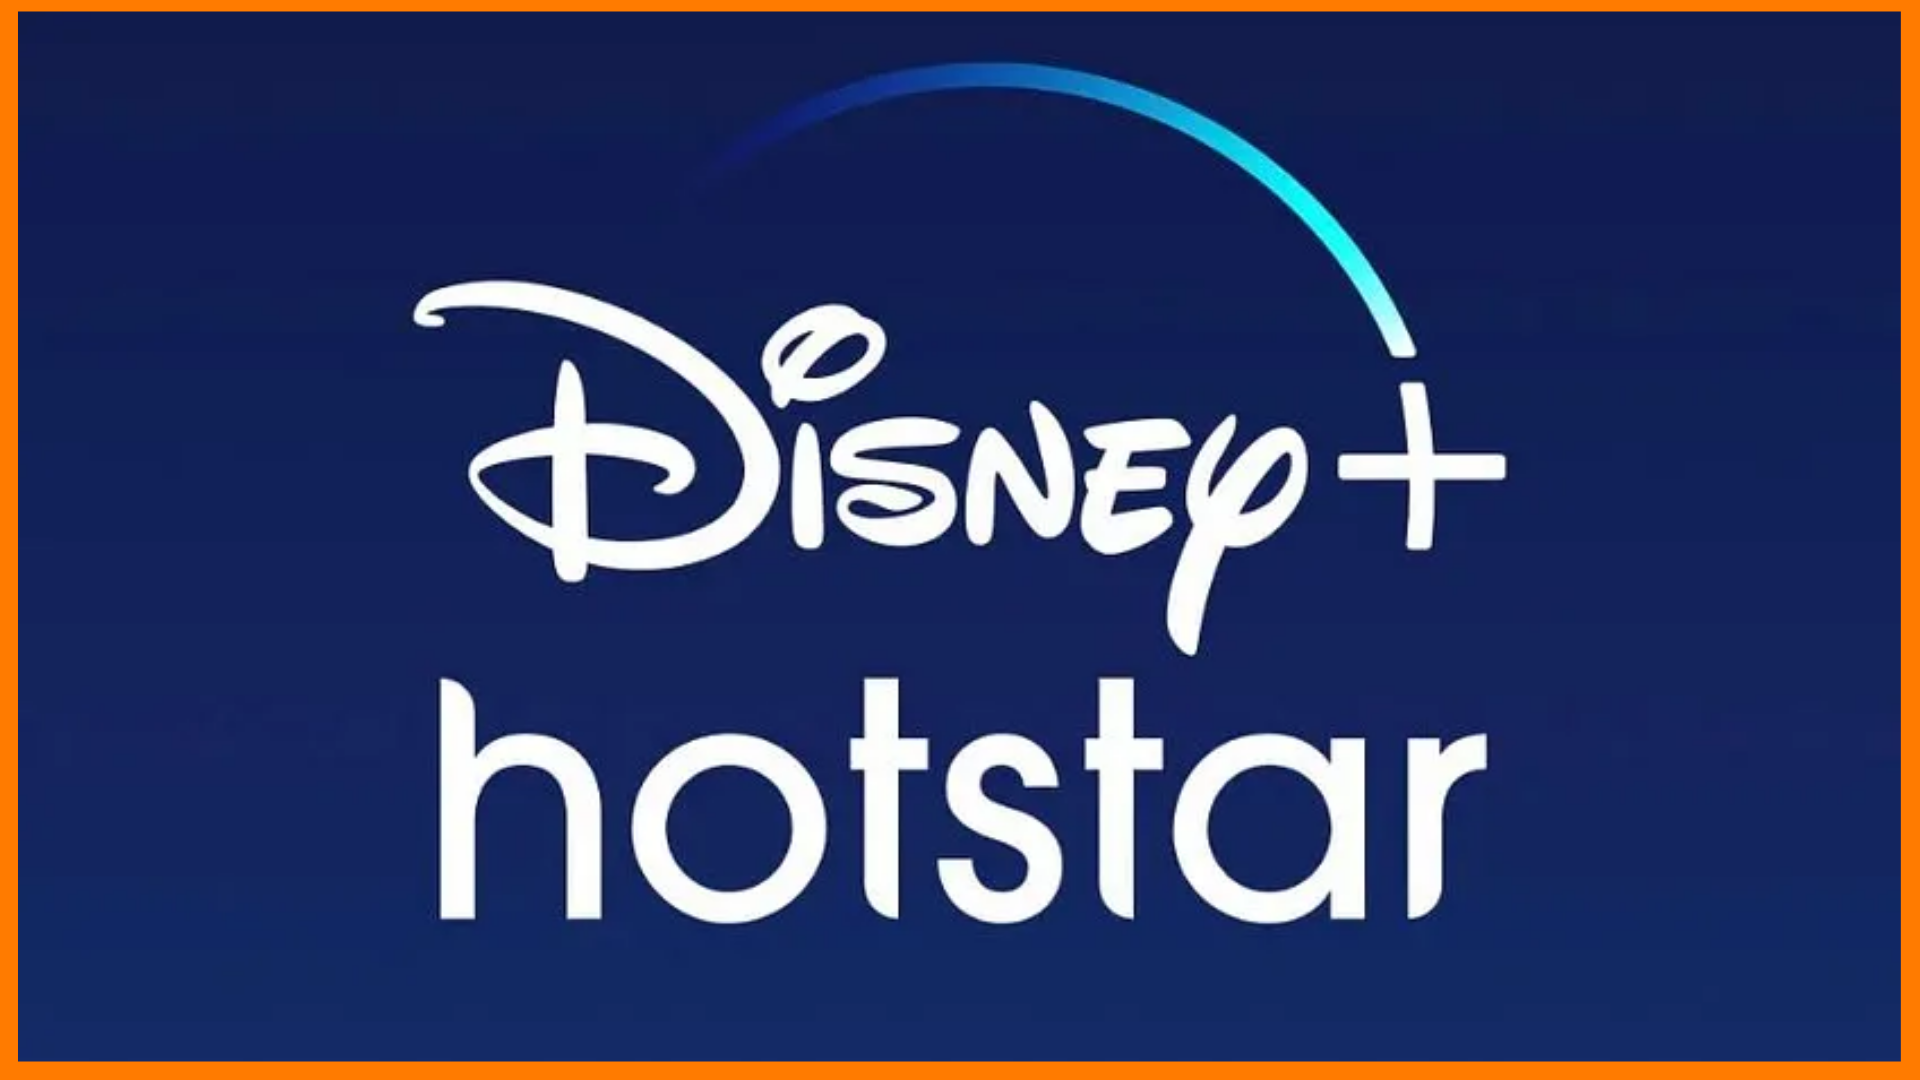 JIO Users Get Disney+Hotstar Subscription For One Year